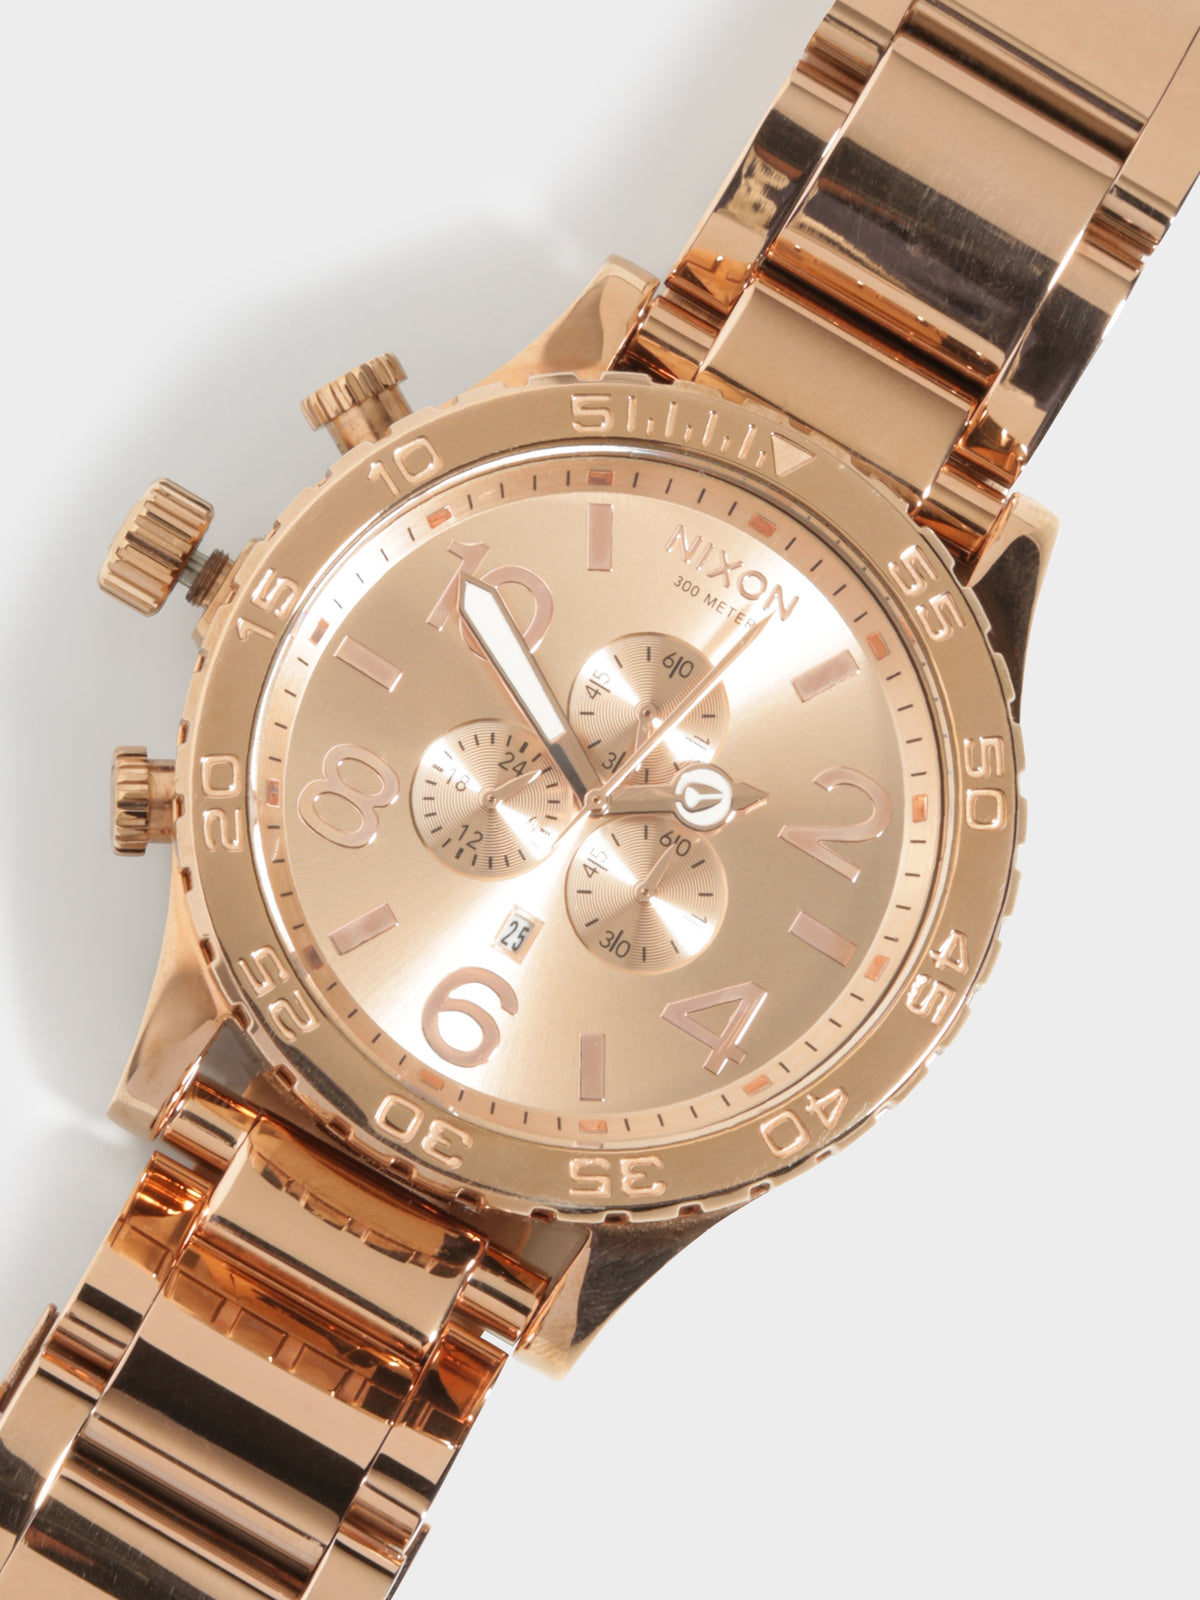 51-30 Chrono 51mm Oversized Chronograph Watch in Rose Gold